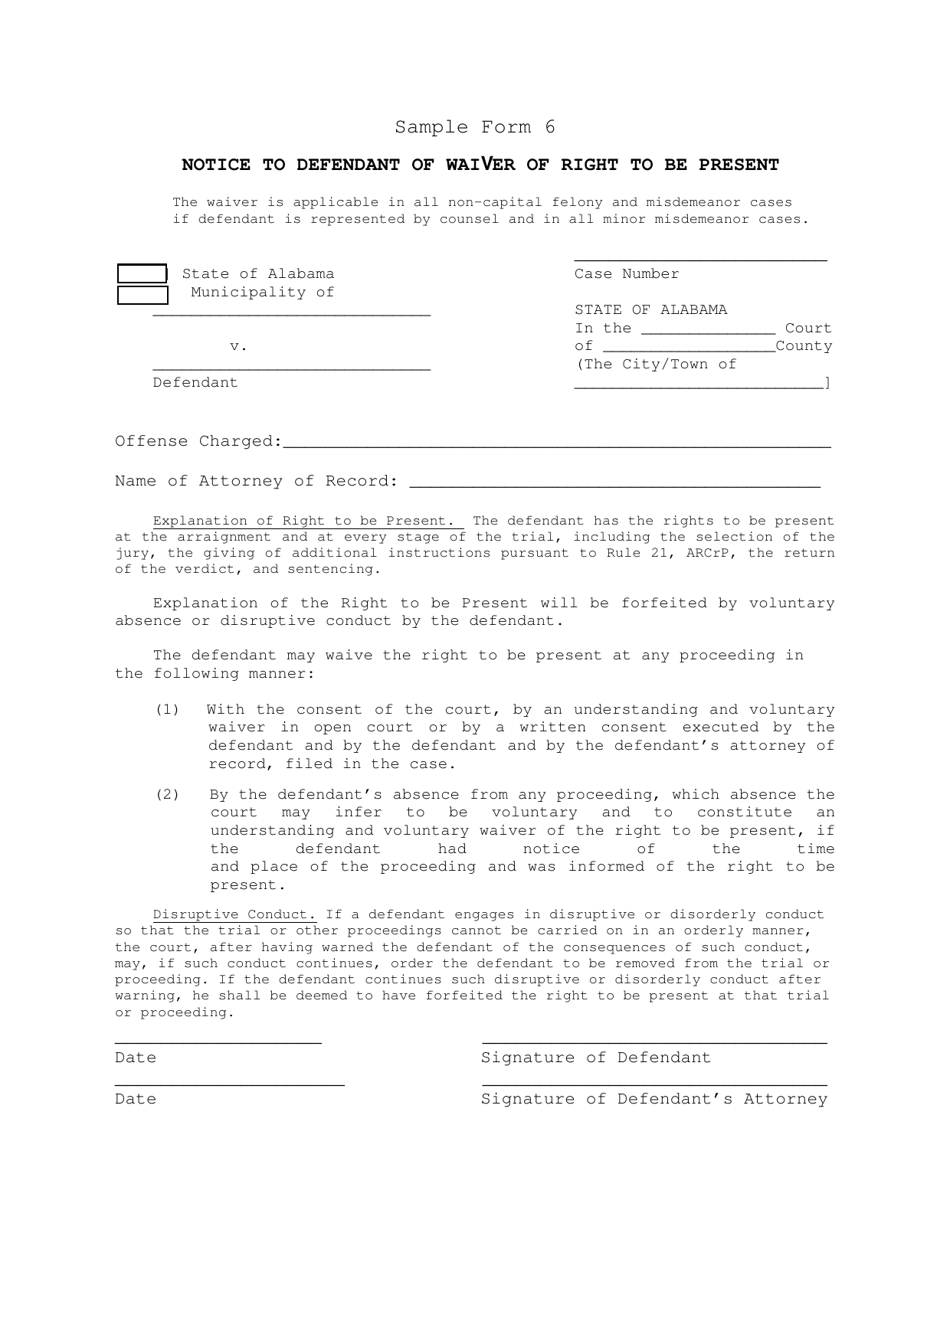 Sample Form 6 Notice to Defendant of Waiver of Right to Be Present - Alabama, Page 1